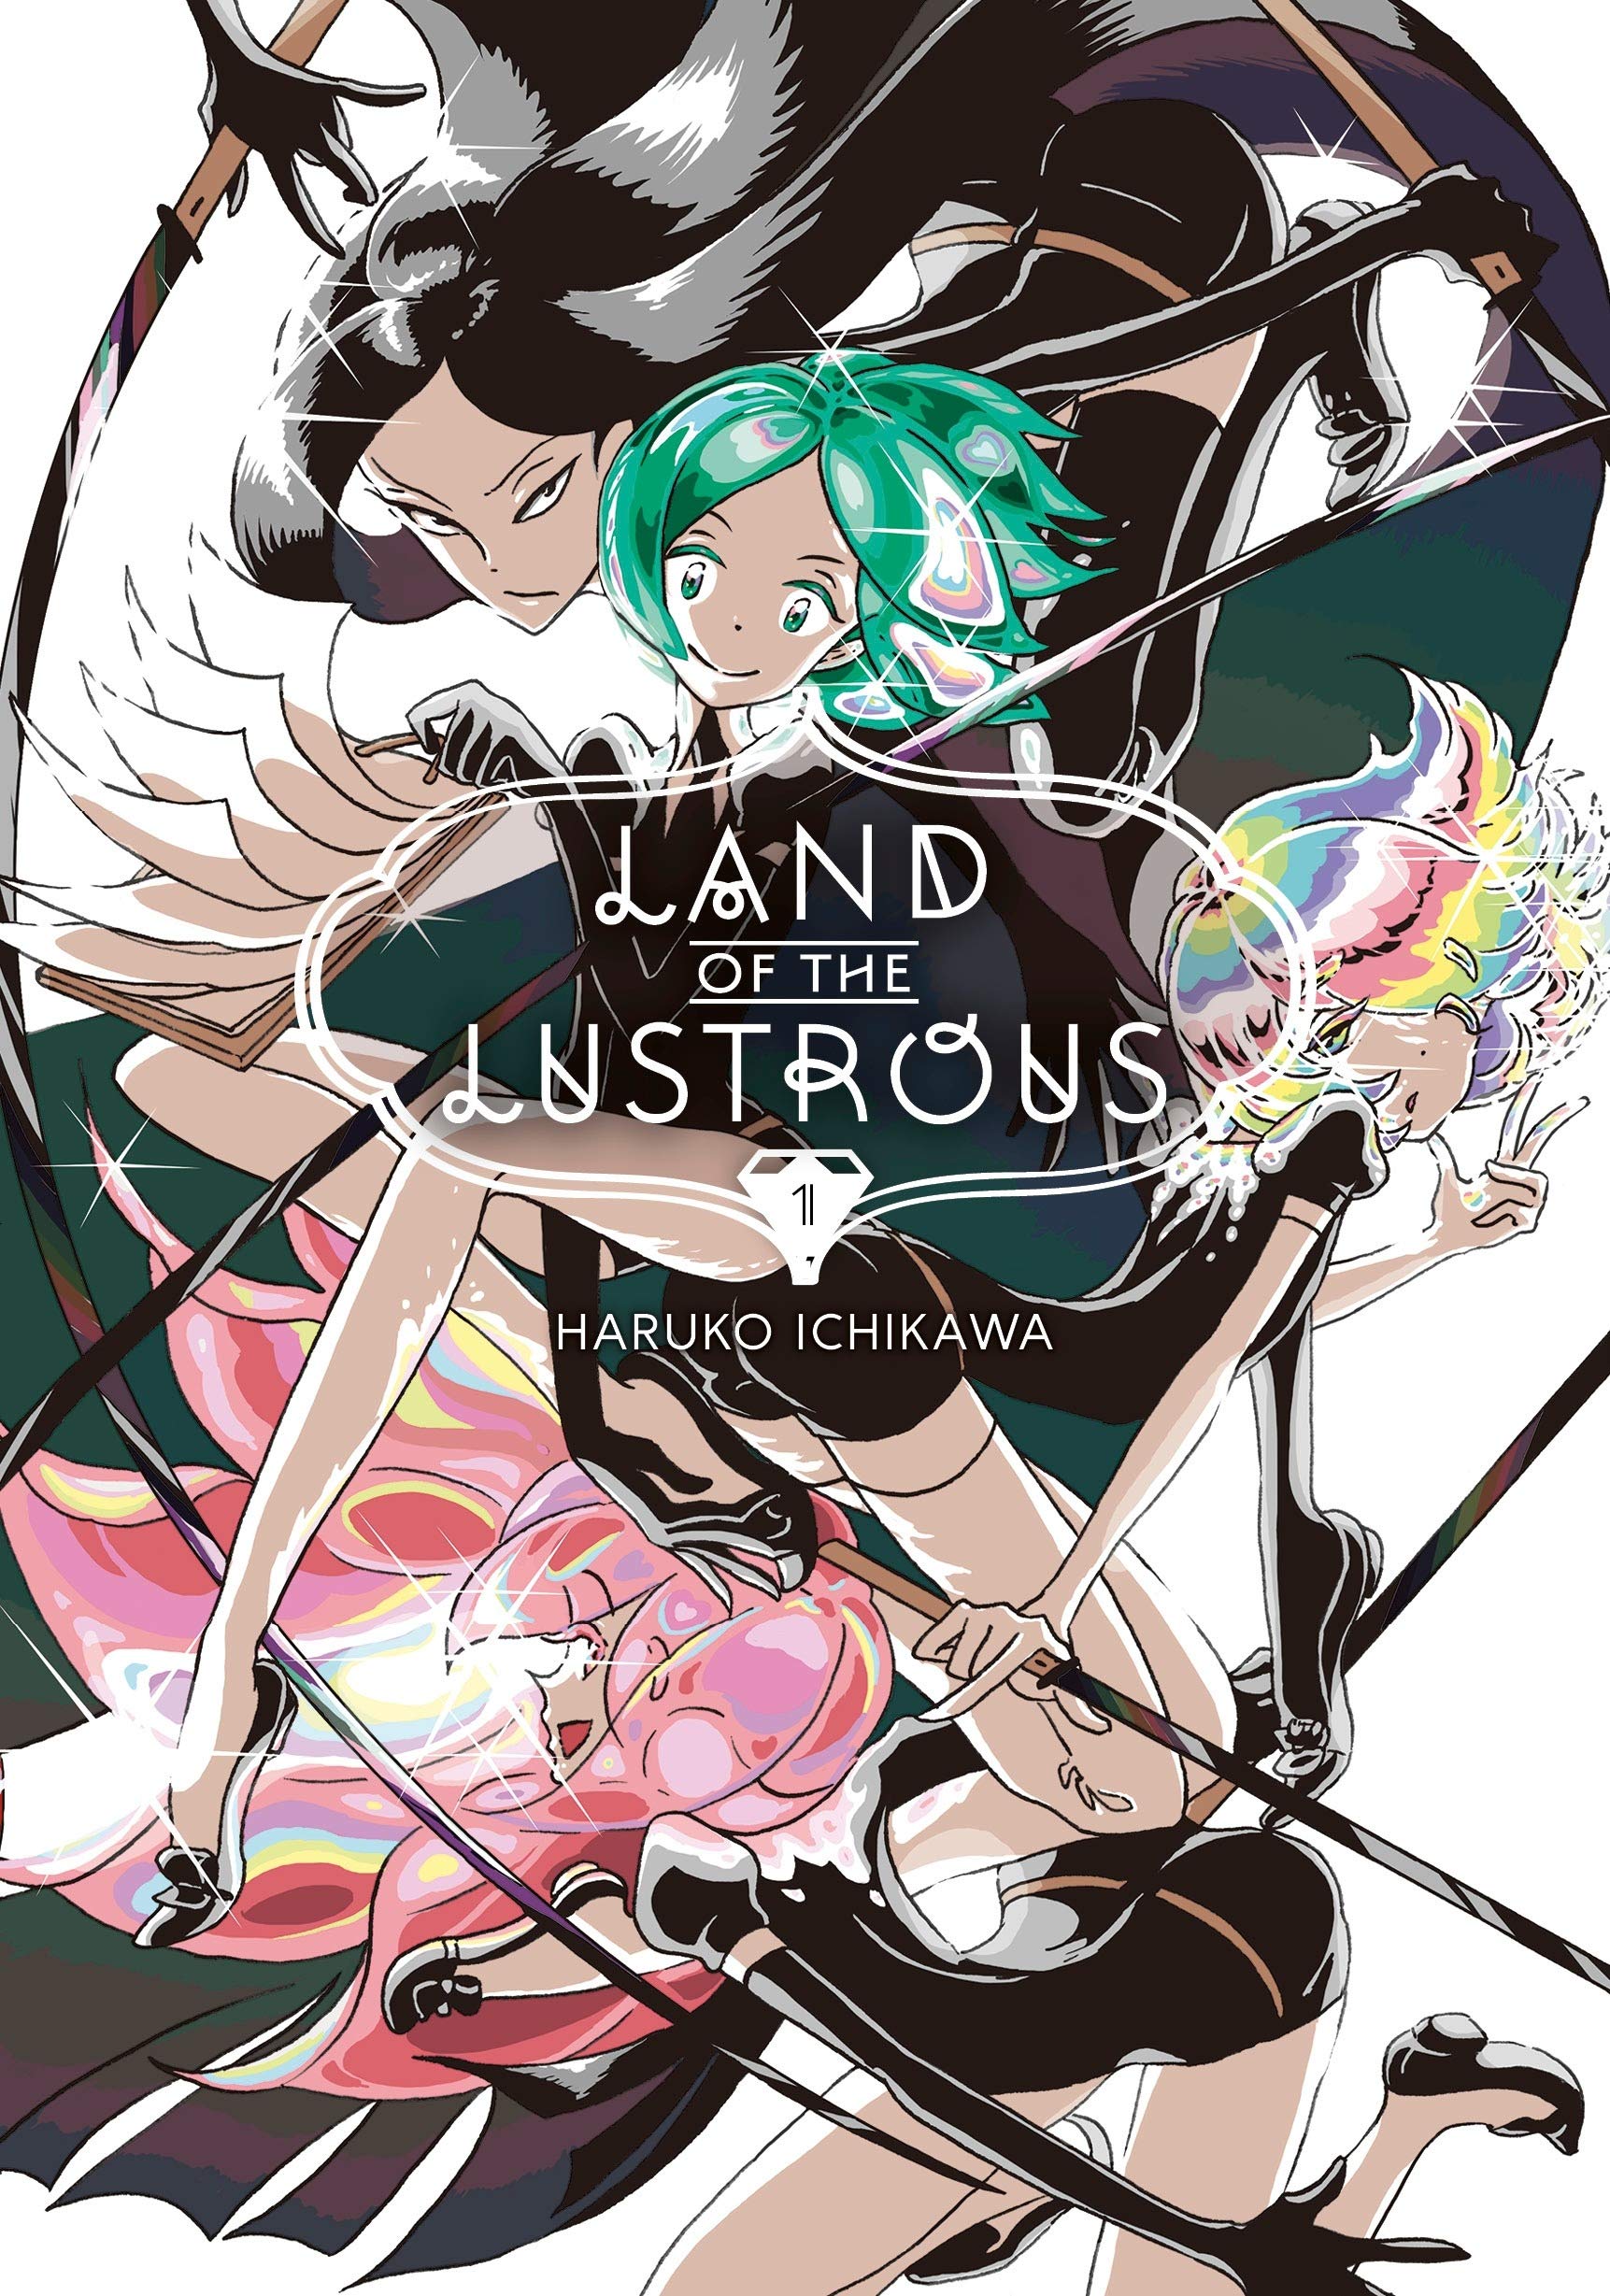 Land of the Lustrous - Volume 1